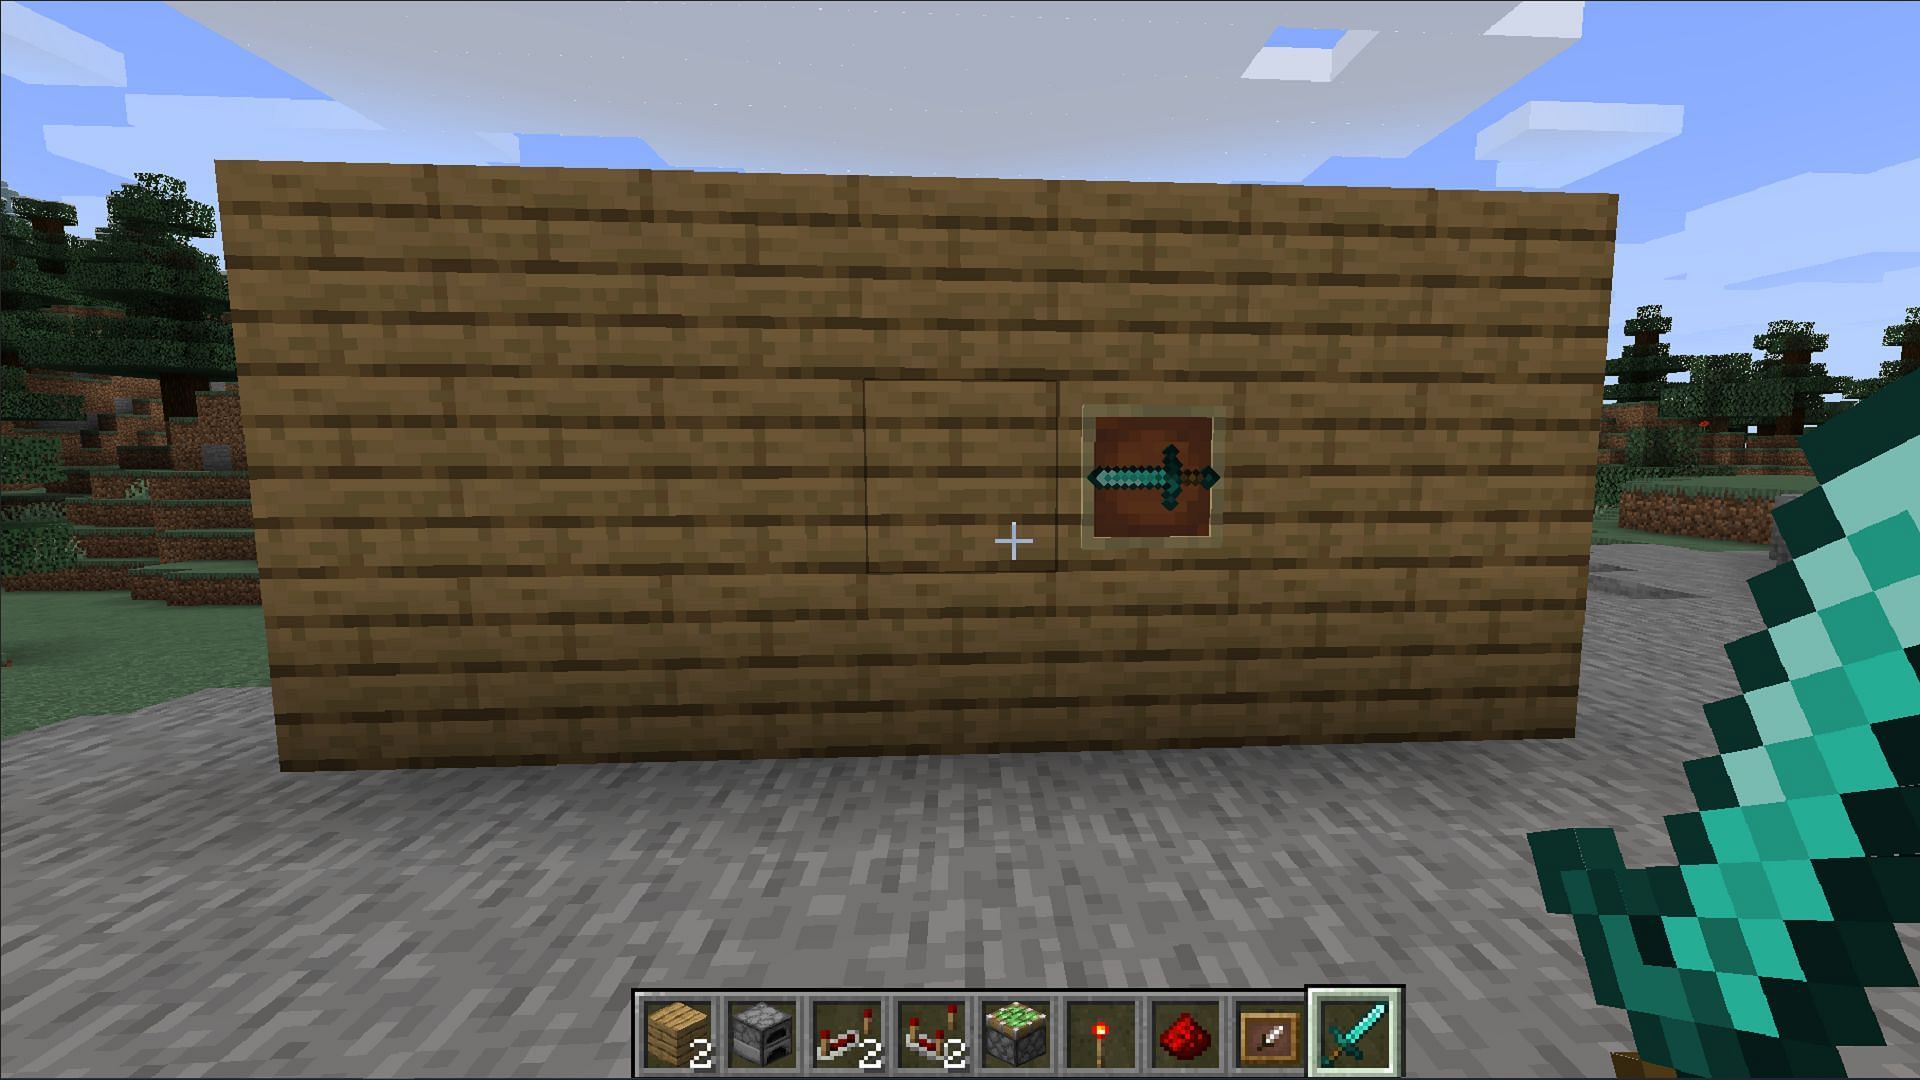 With a little redstone, you can keep your belongings safely in sight (Image via Mojang)